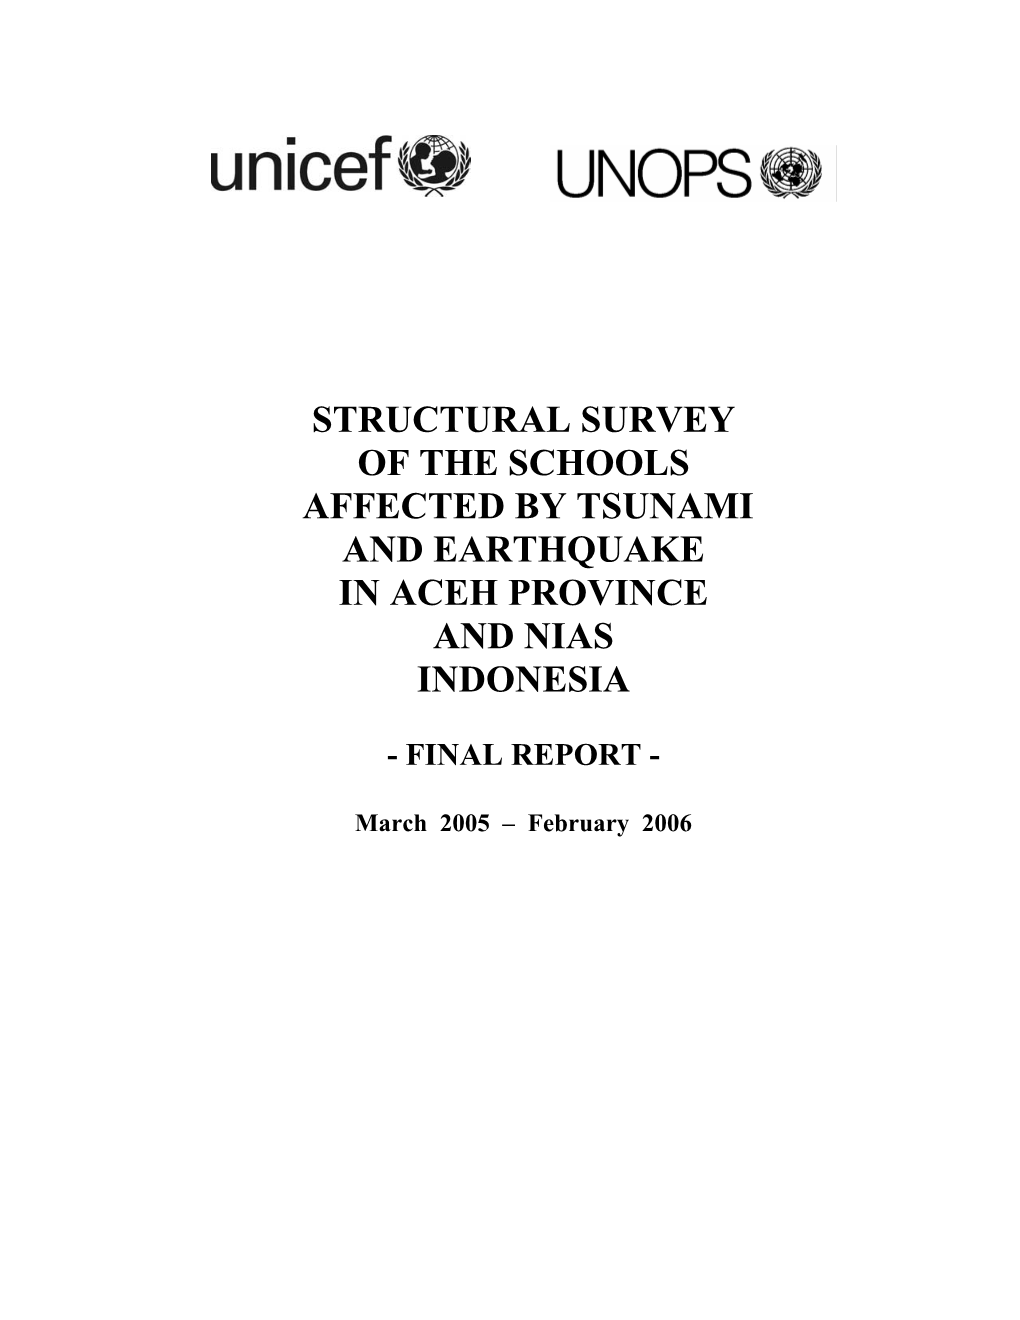 Structural Survey of the Schools Affected by Tsunami and Earthquake in Aceh Province and Nias Indonesia